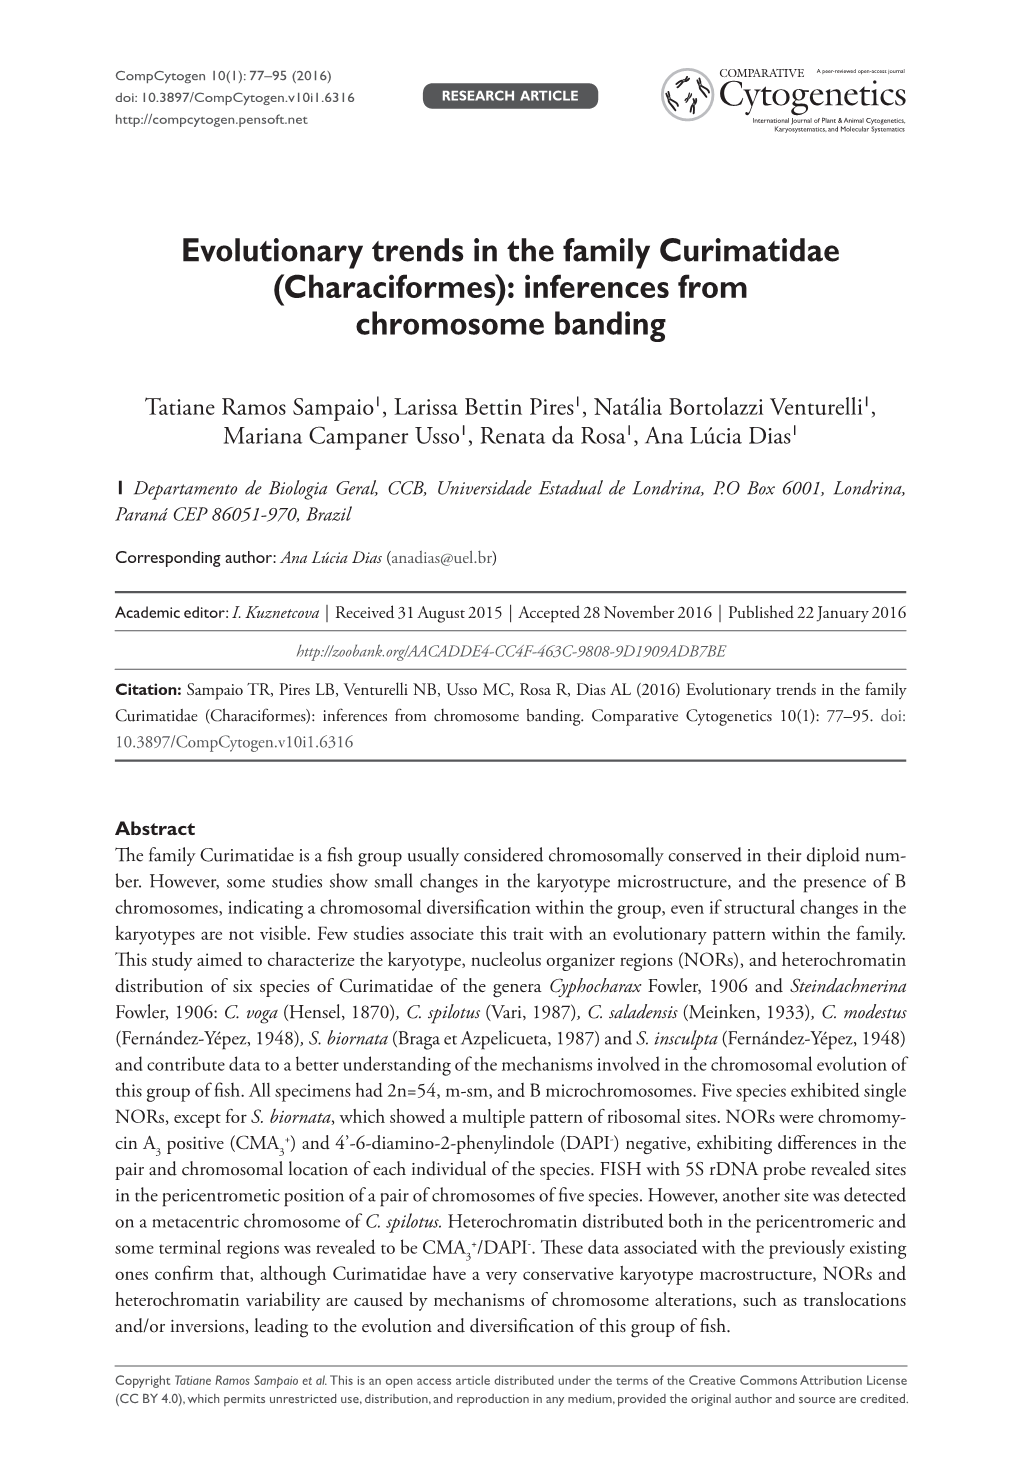 Evolutionary Trends in the Family Curimatidae (Characiformes): Inferences from Chromosome Banding